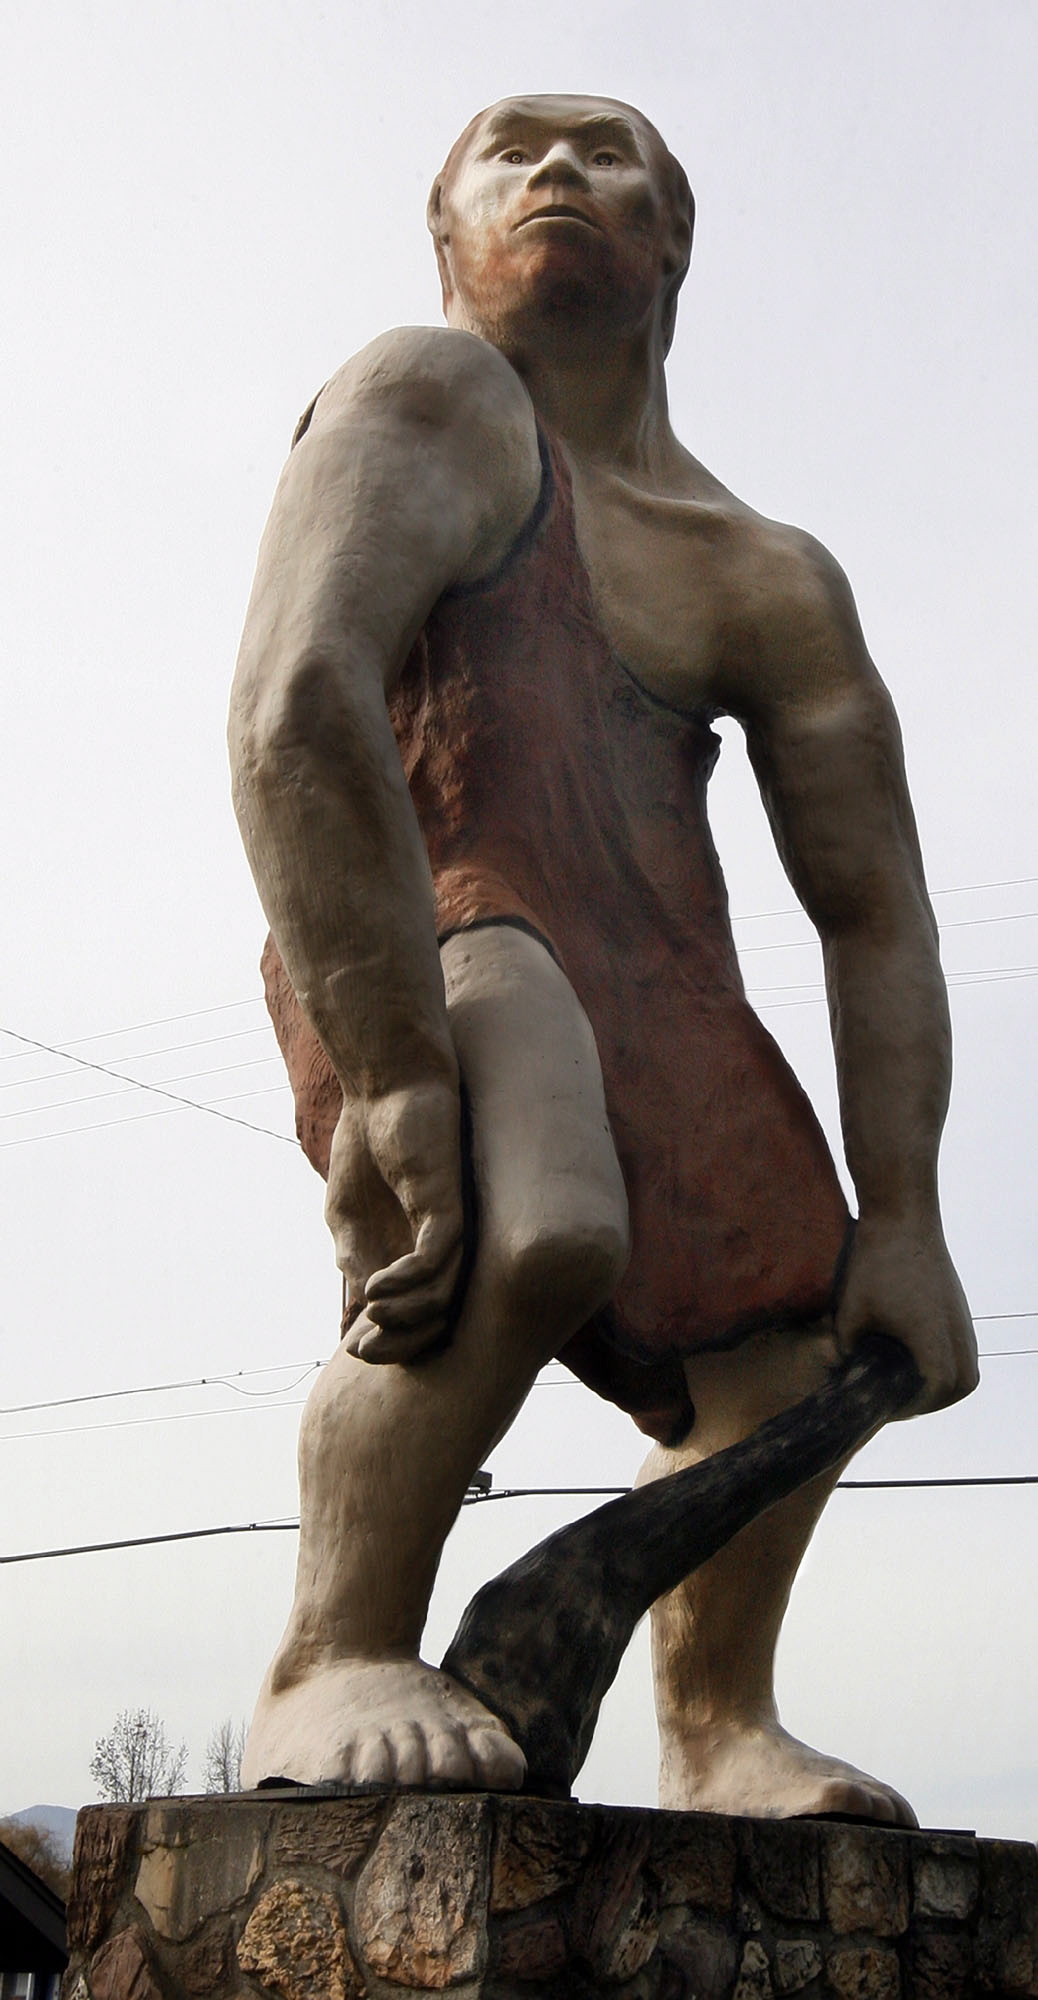 A 25-foot tall statue of a caveman that for 42 years has been standing at the north end of Grants Pass, Ore.